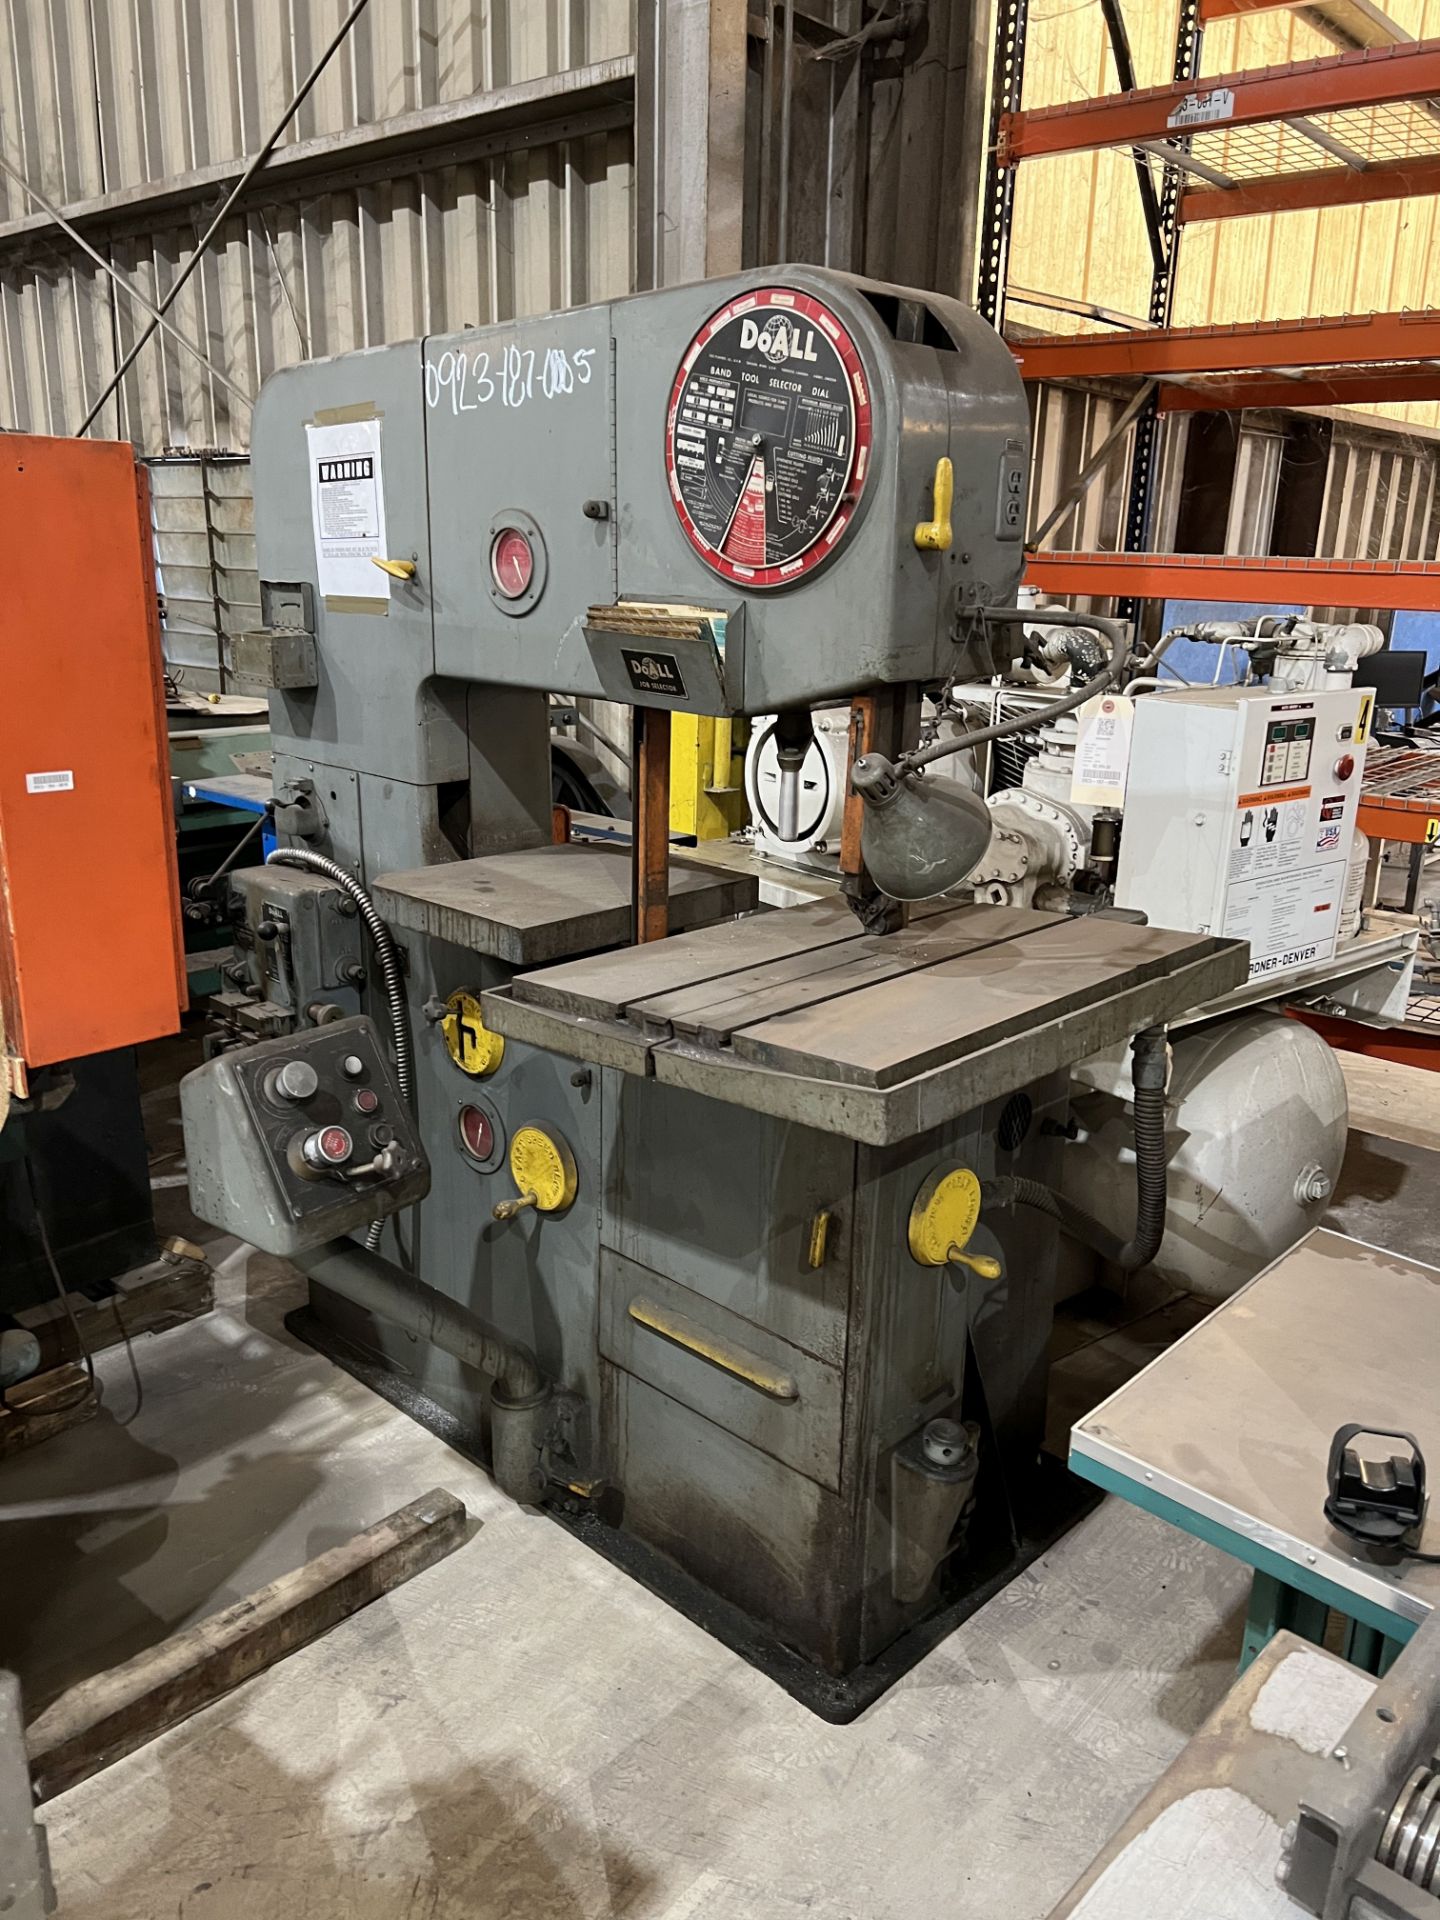 DOALL BANDSAW, Model 3612-3. , Date: n/a; s/n 153-691067, Approx. Capacity: 16", Power: n/a, - Image 29 of 29